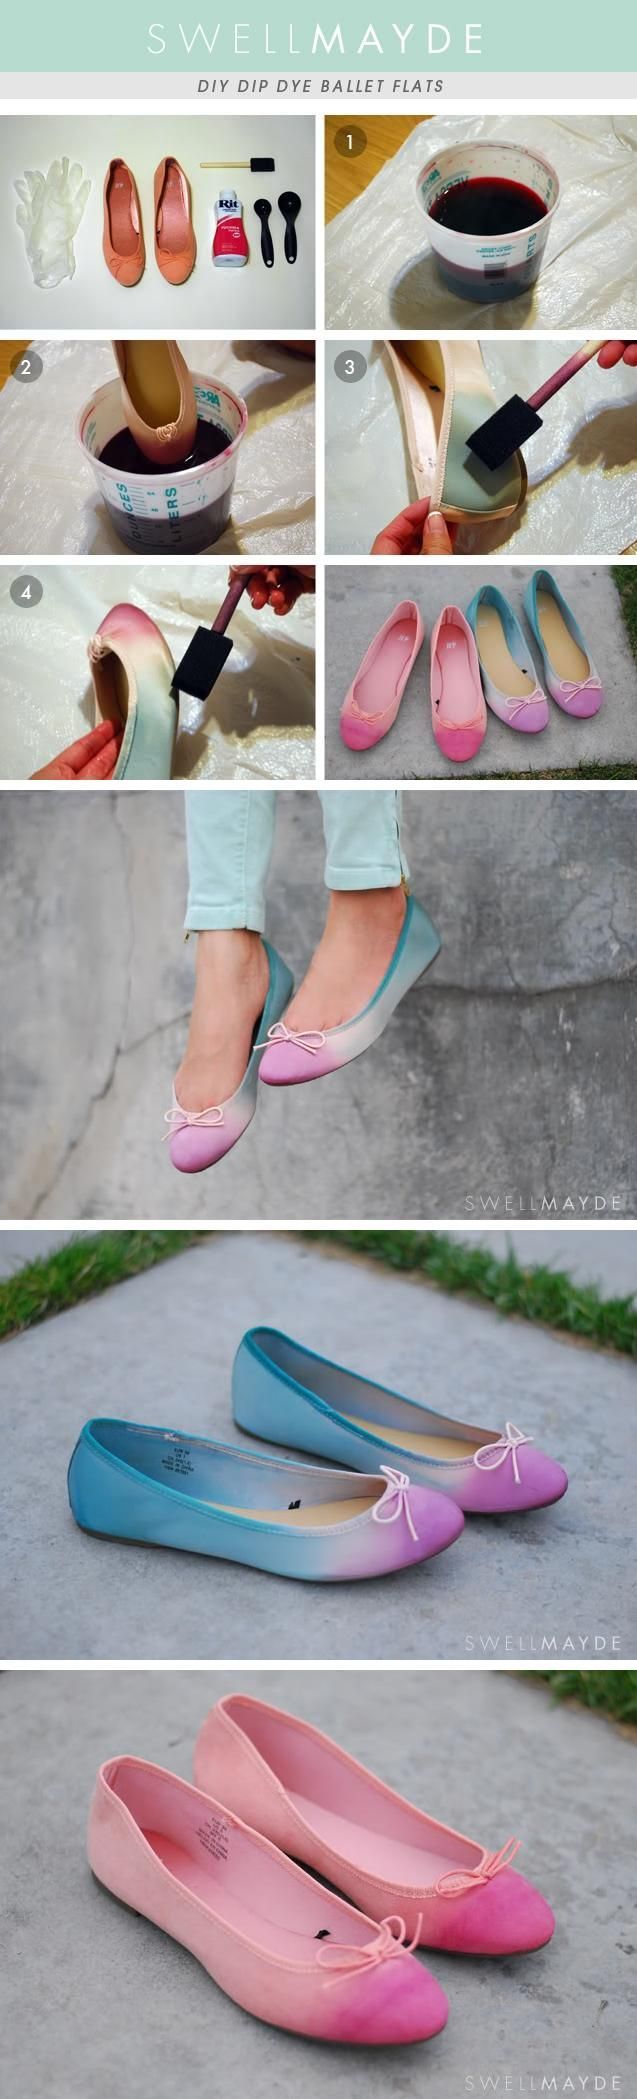 DIY Dip Dye Ombre Ballet Flats… maybe do some old ballet flats in a galaxy print